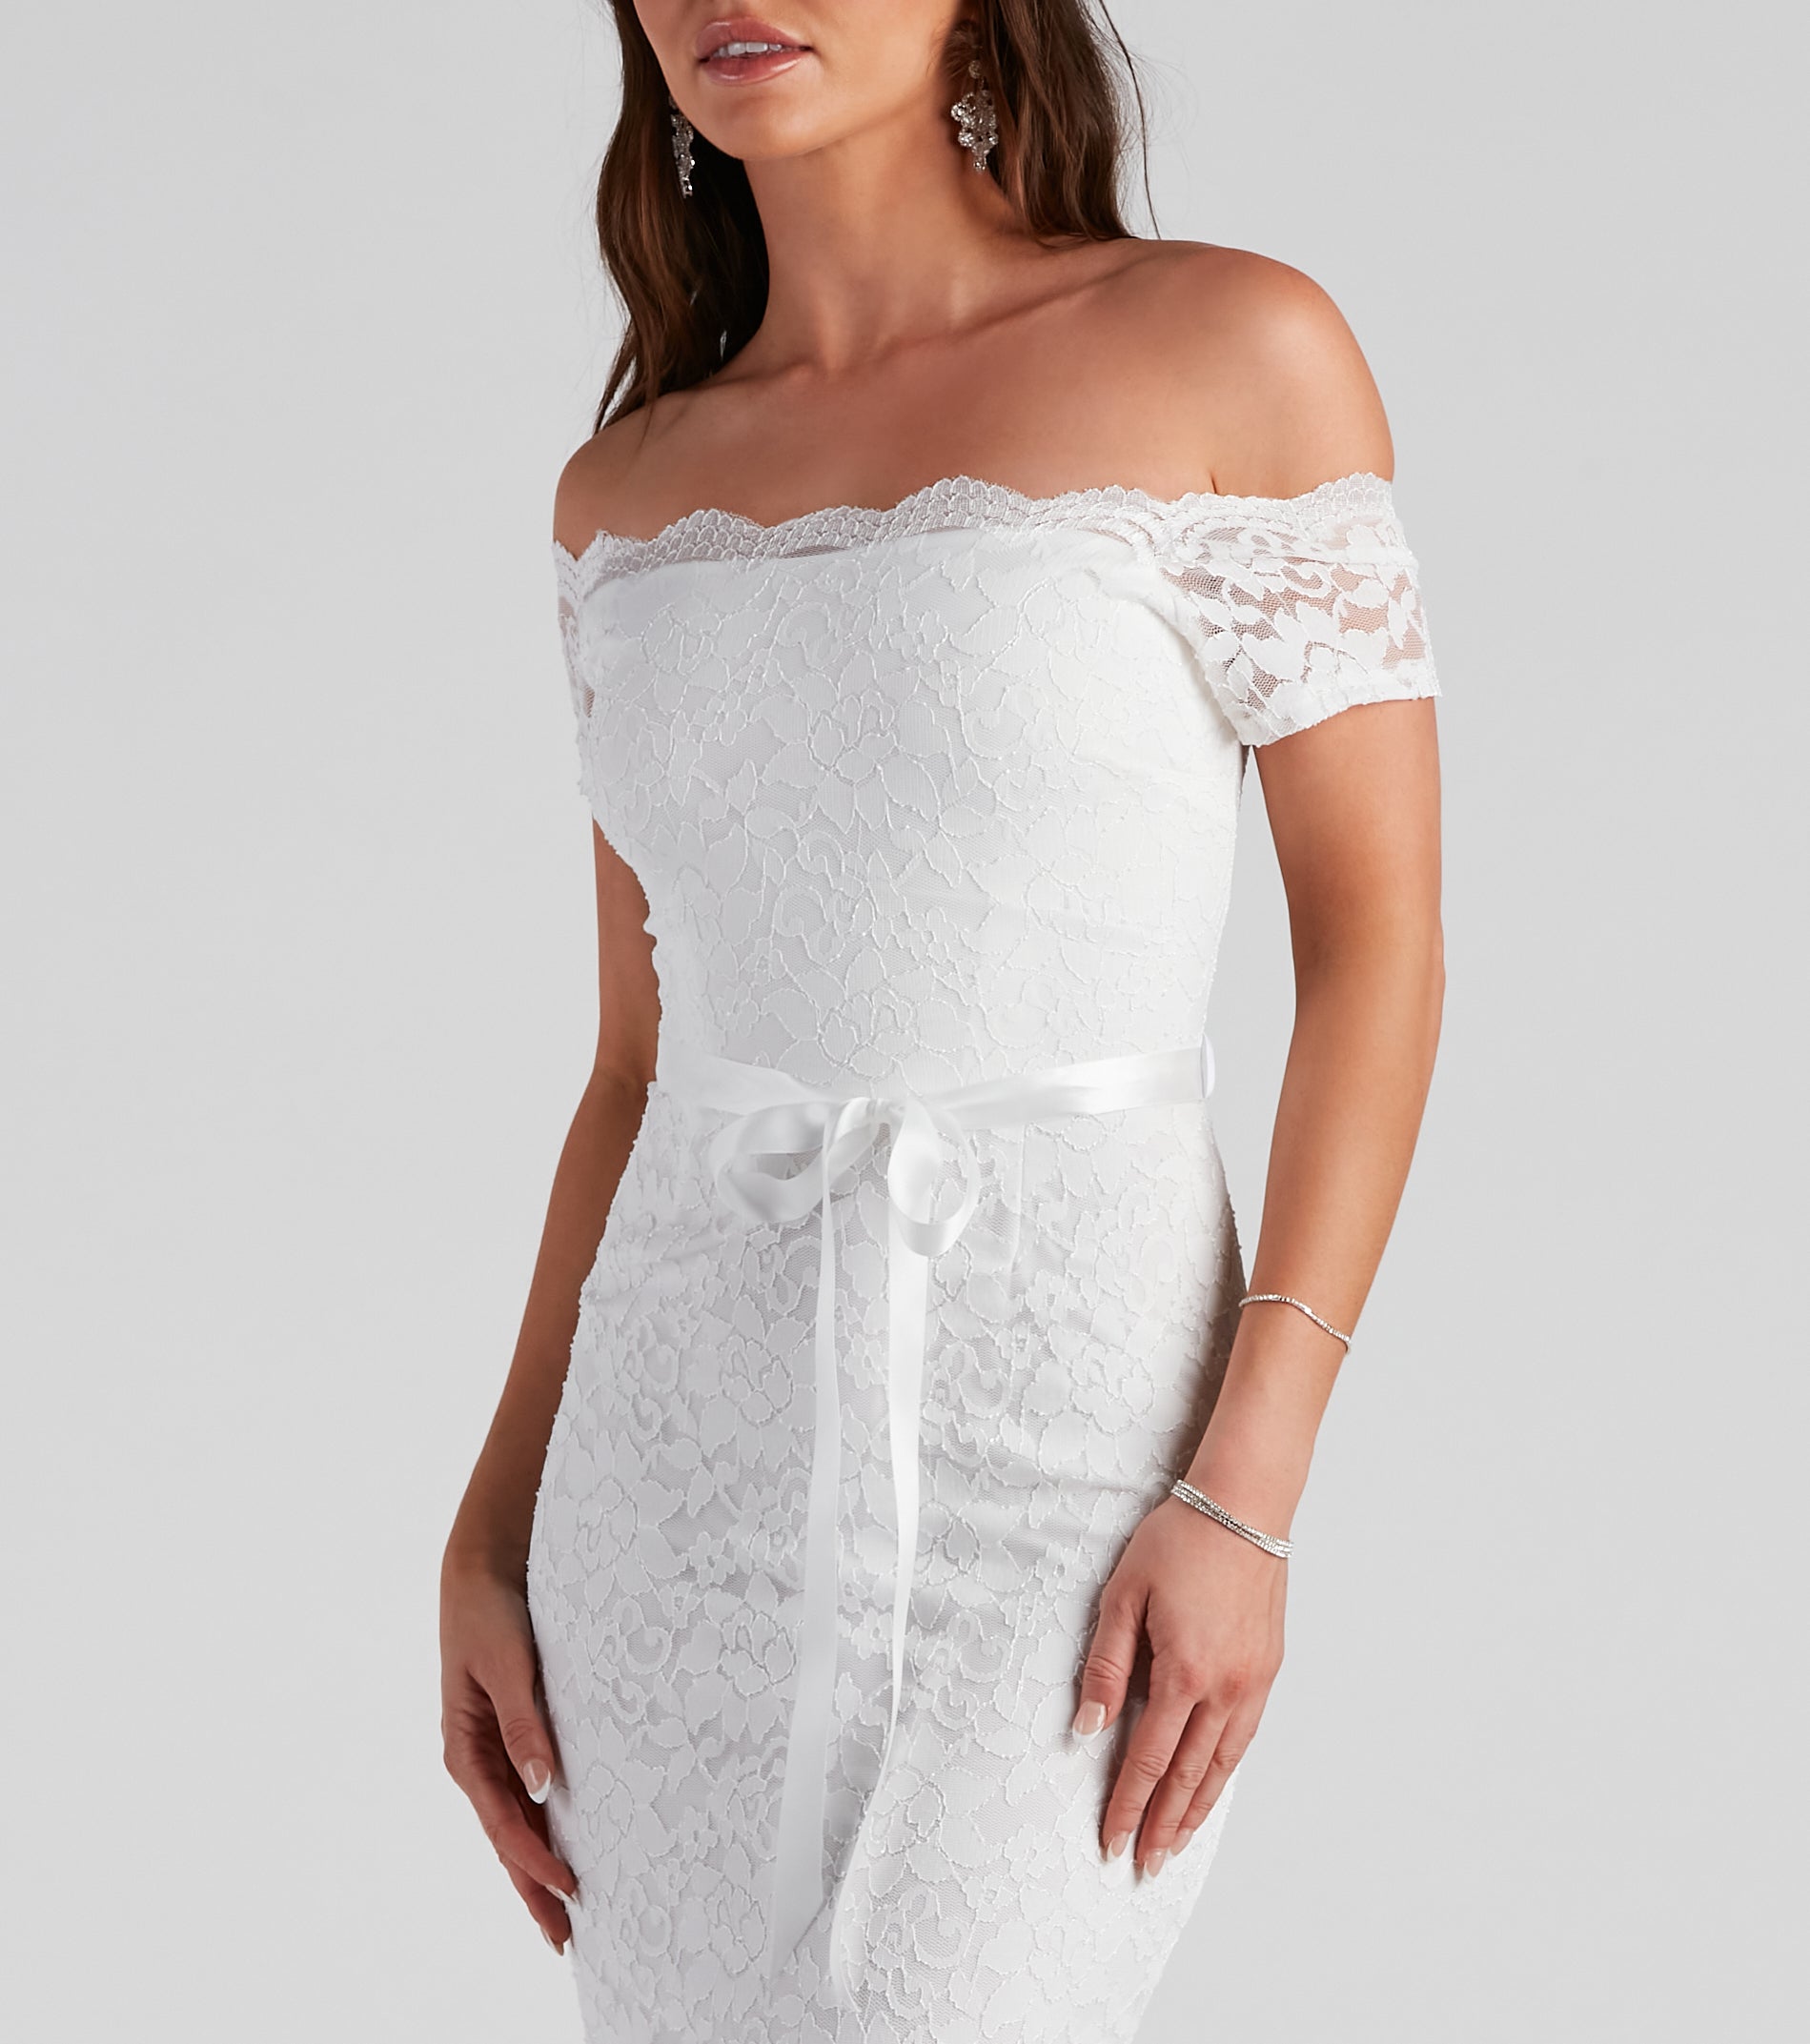 Paige Formal Off-The-Shoulder Scalloped Lace Dress